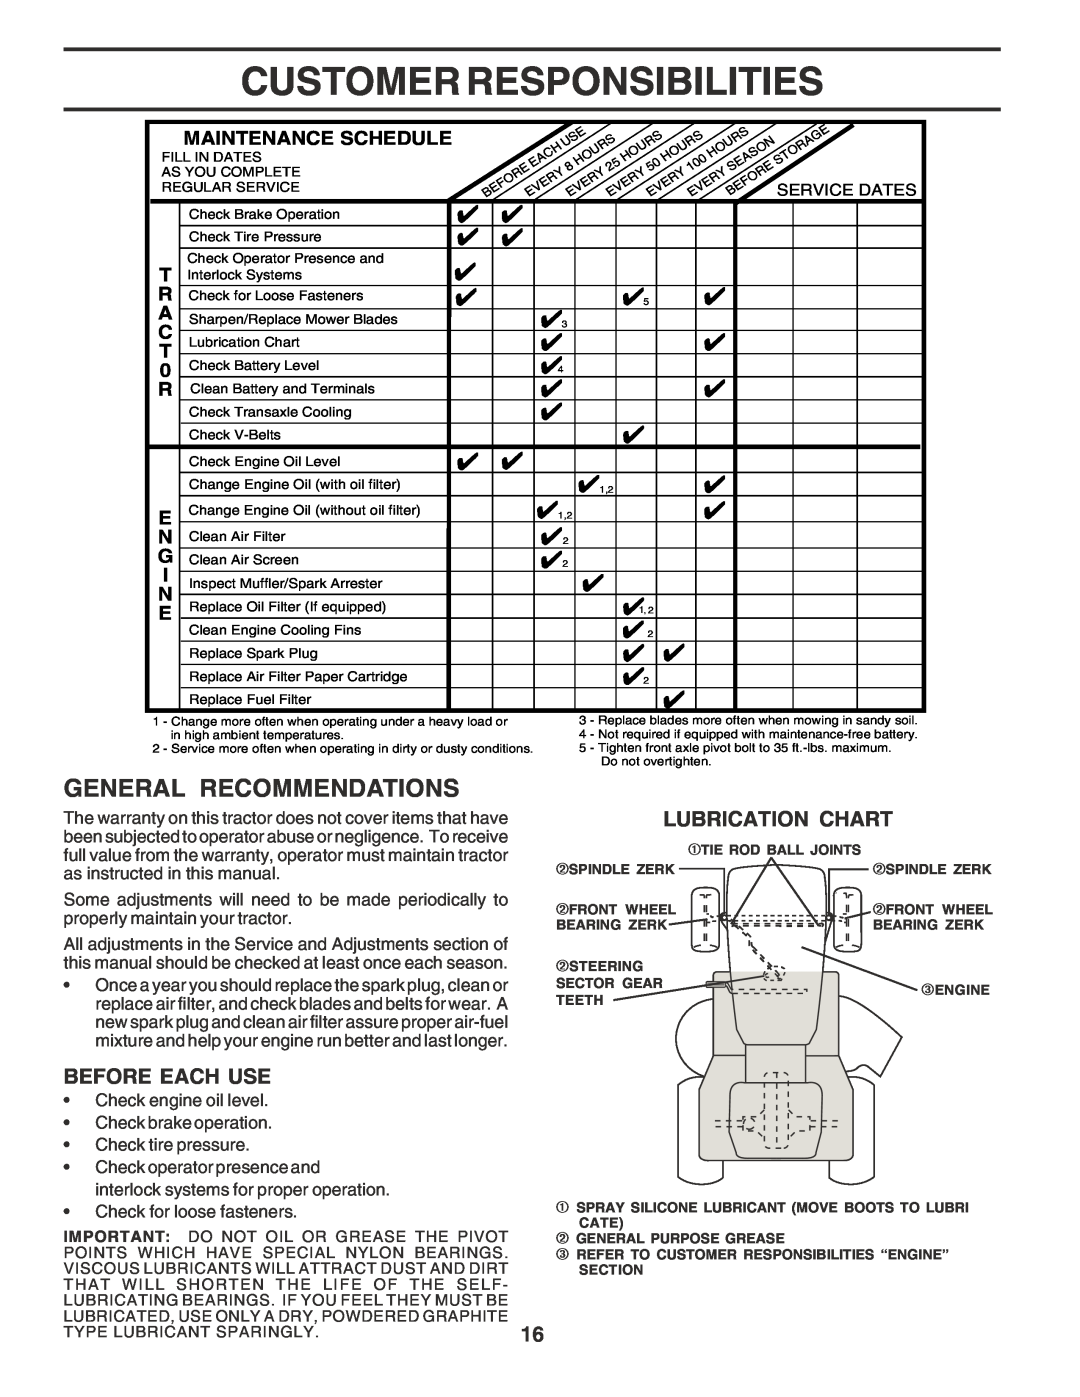 Husqvarna GTH2350 owner manual Customer Responsibilities, General Recommendations, Before Each Use, Lubrication Chart 